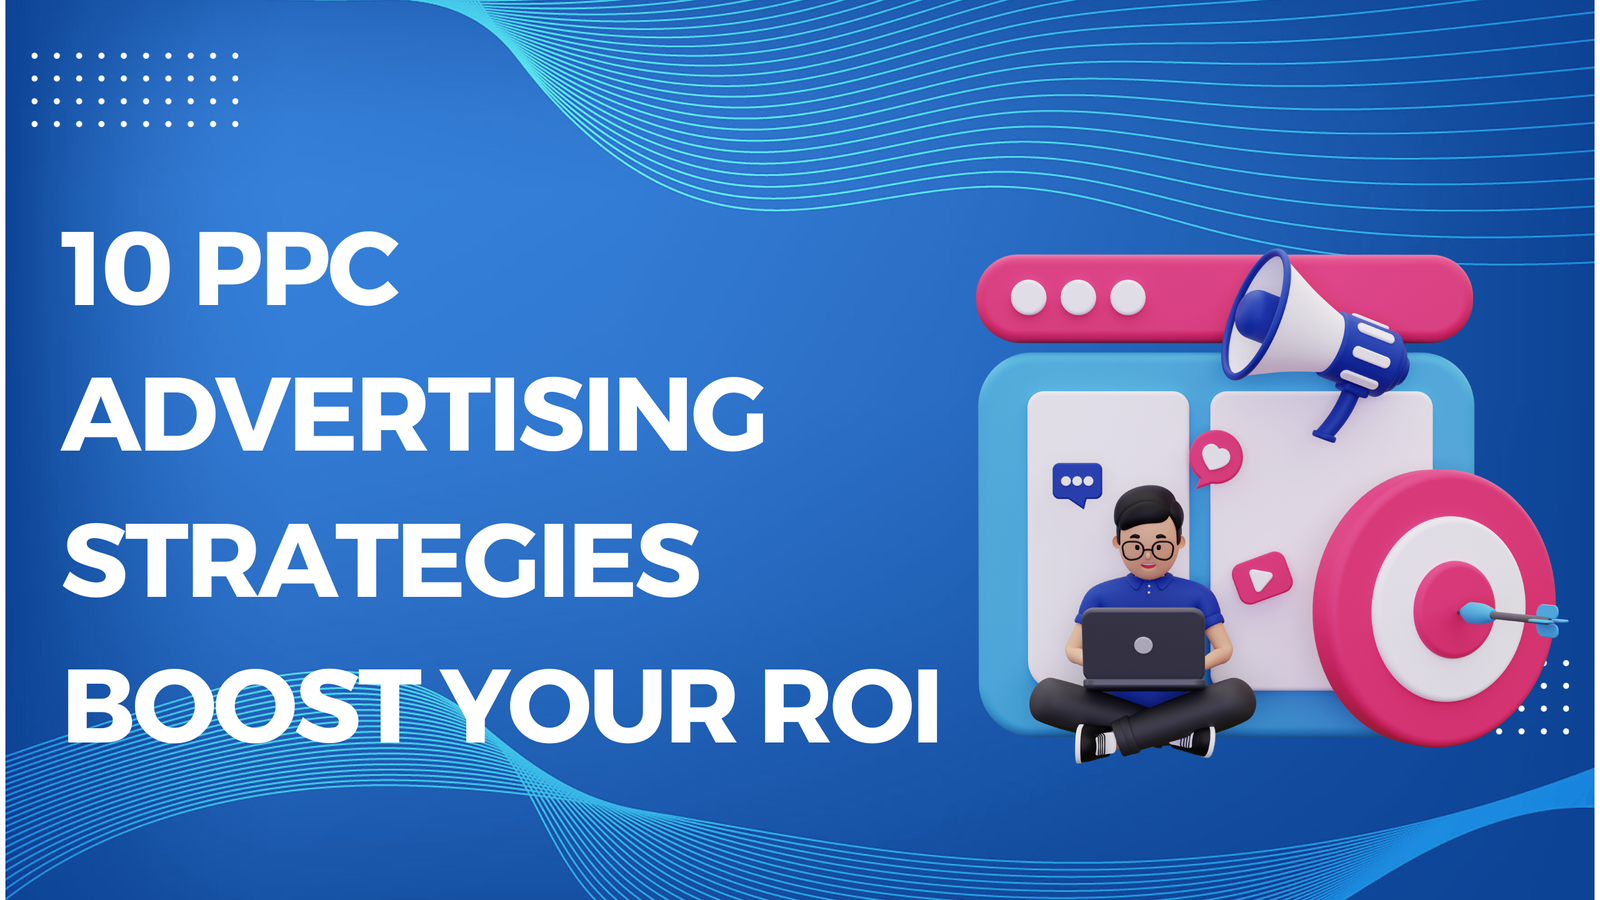 10 PPC Advertising Strategies Boost Your ROI